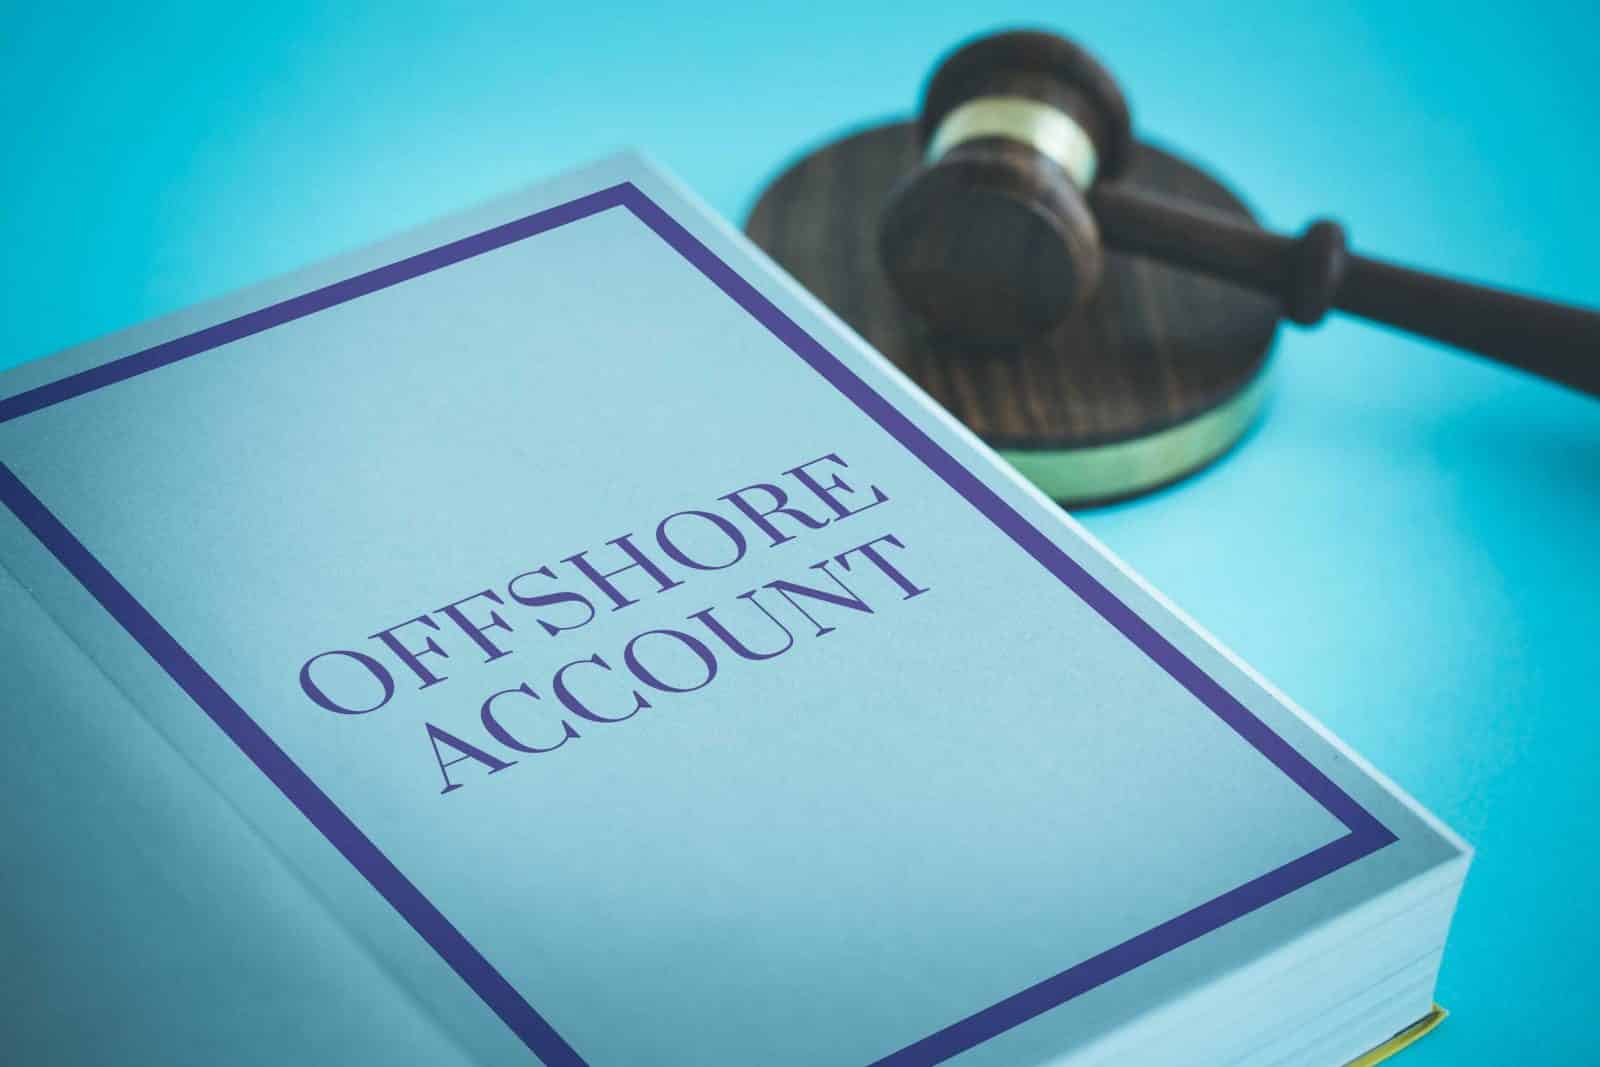 Offshore Account Holders Should Consider Making a Voluntary Disclosure as Paradise Papers Are Investigated